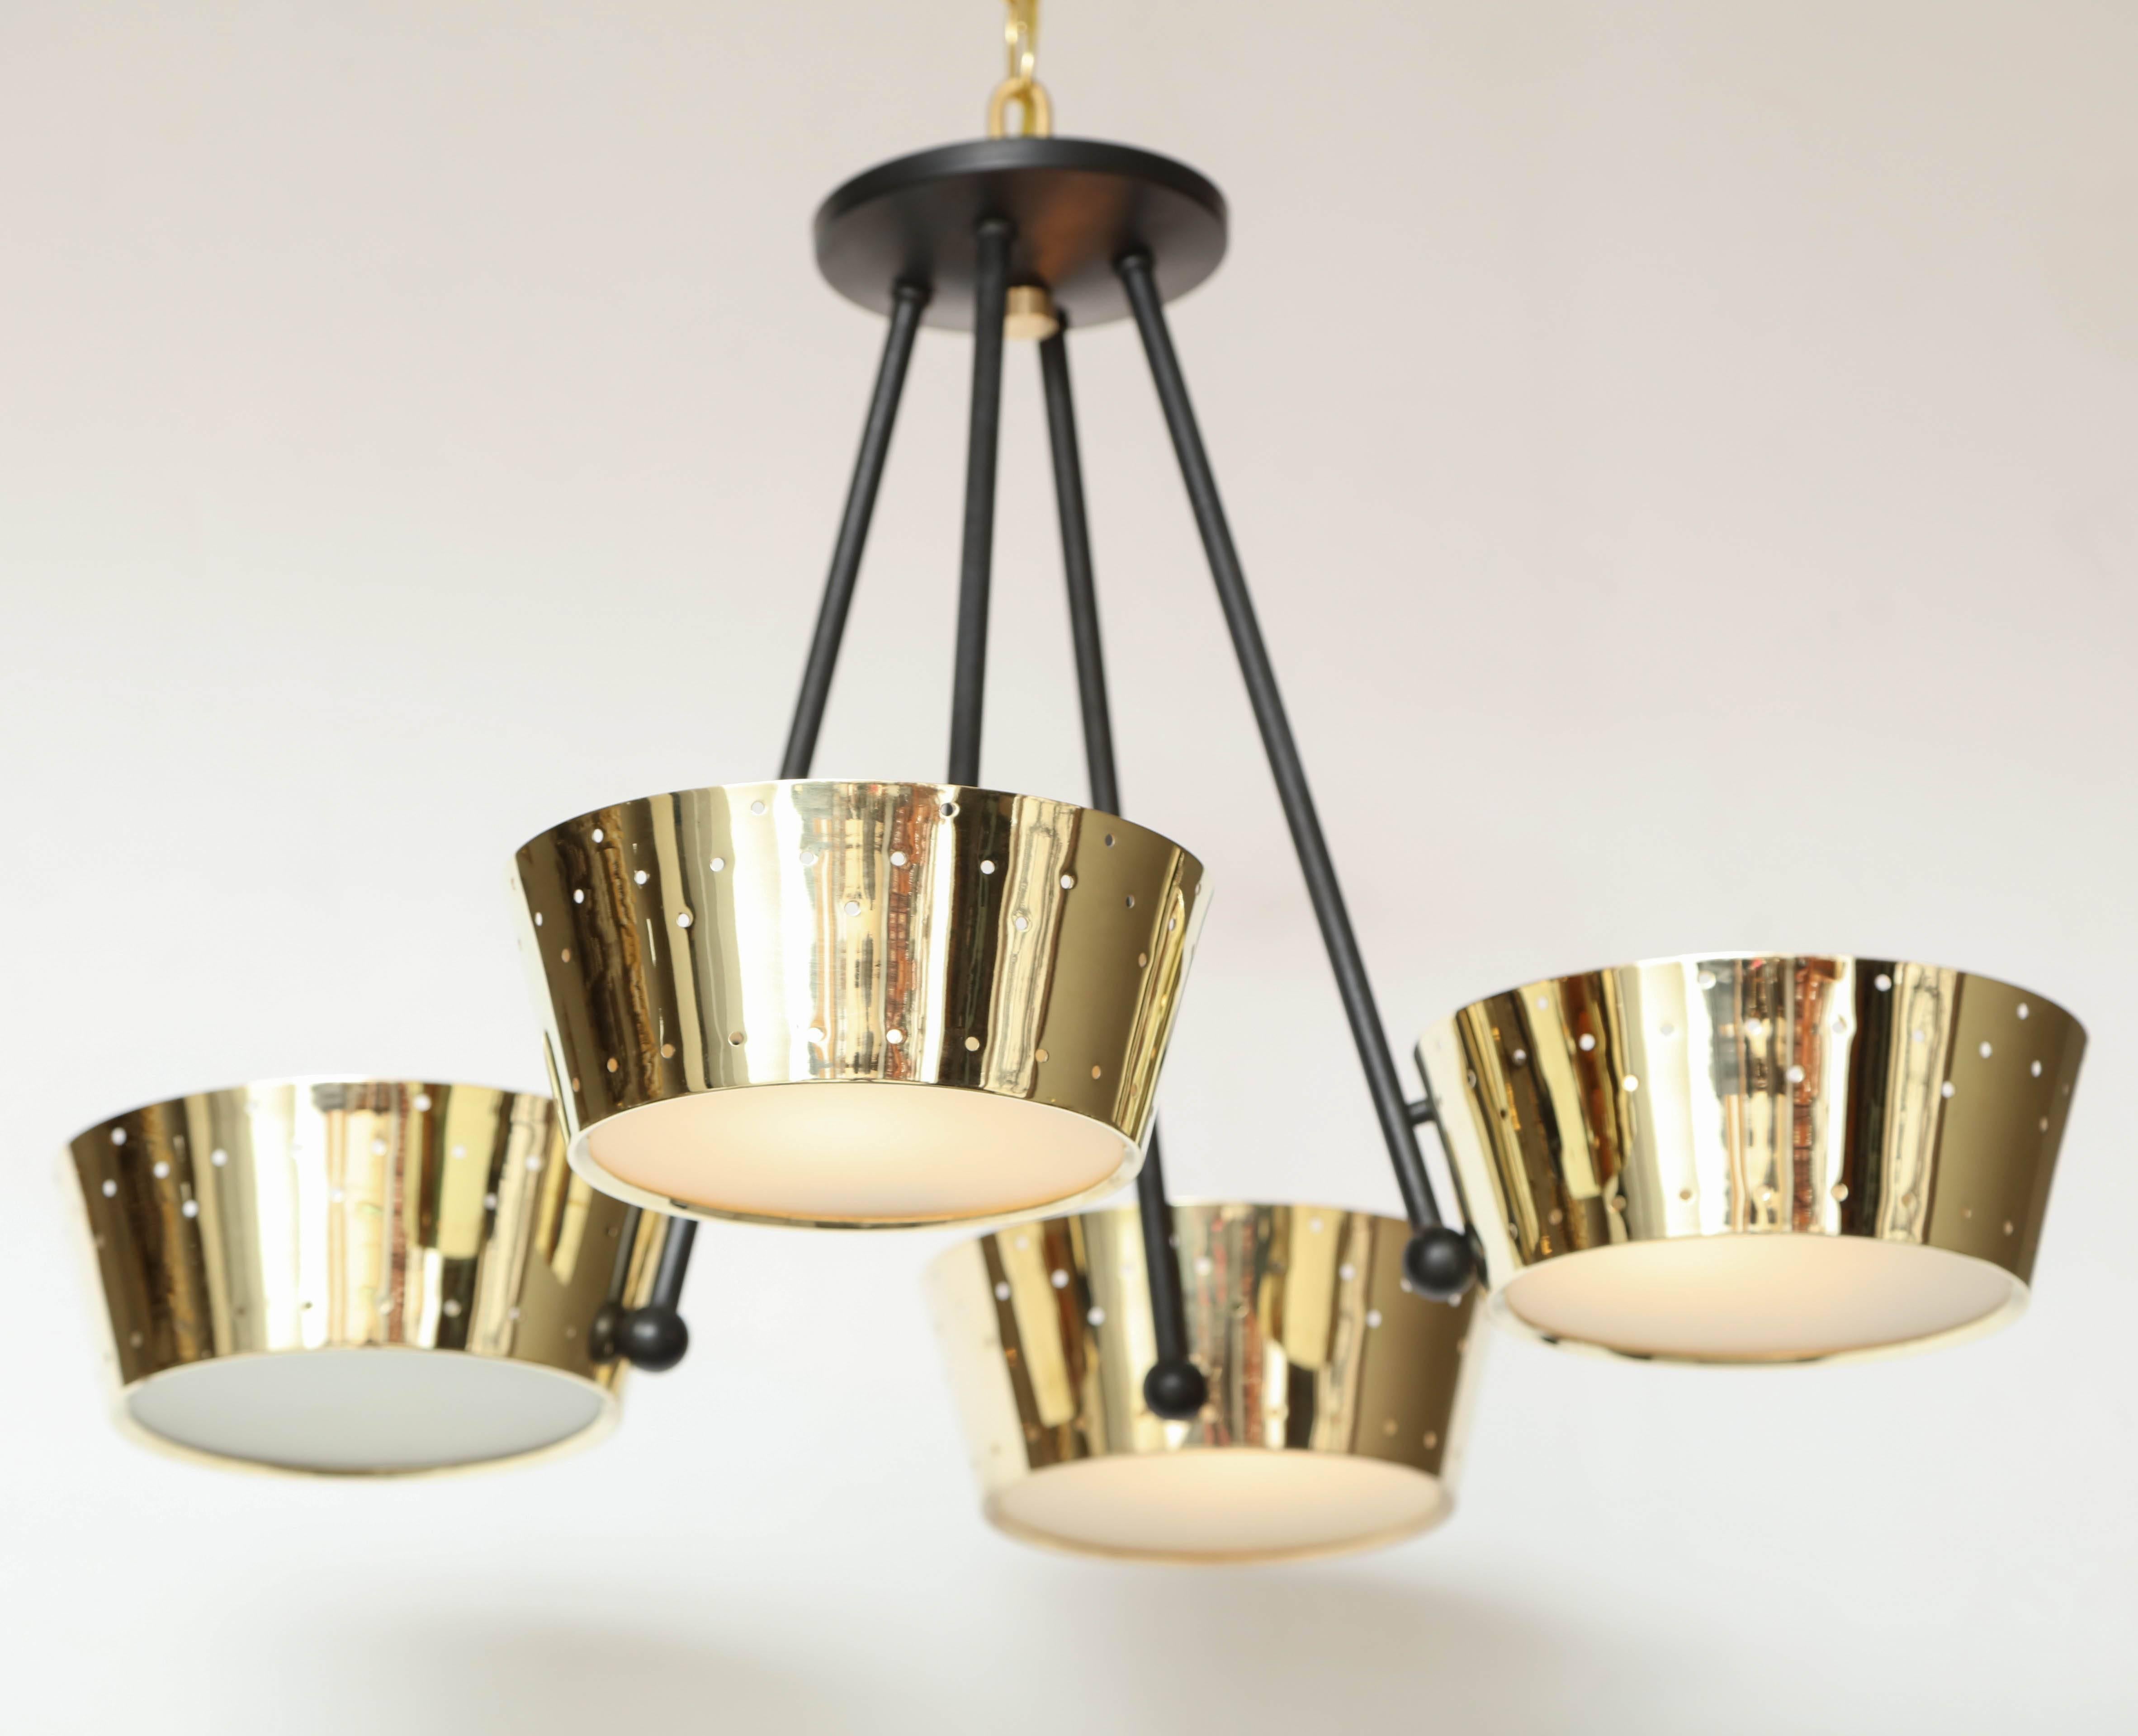 This mid-century modern chandelier by Gerald Thurston for Lightolier features four pierced brass cylinders with frosted glass inserts diffusing light at the bottom, joined by an black-painted steel frame. Newly restored, repolished and rewired.